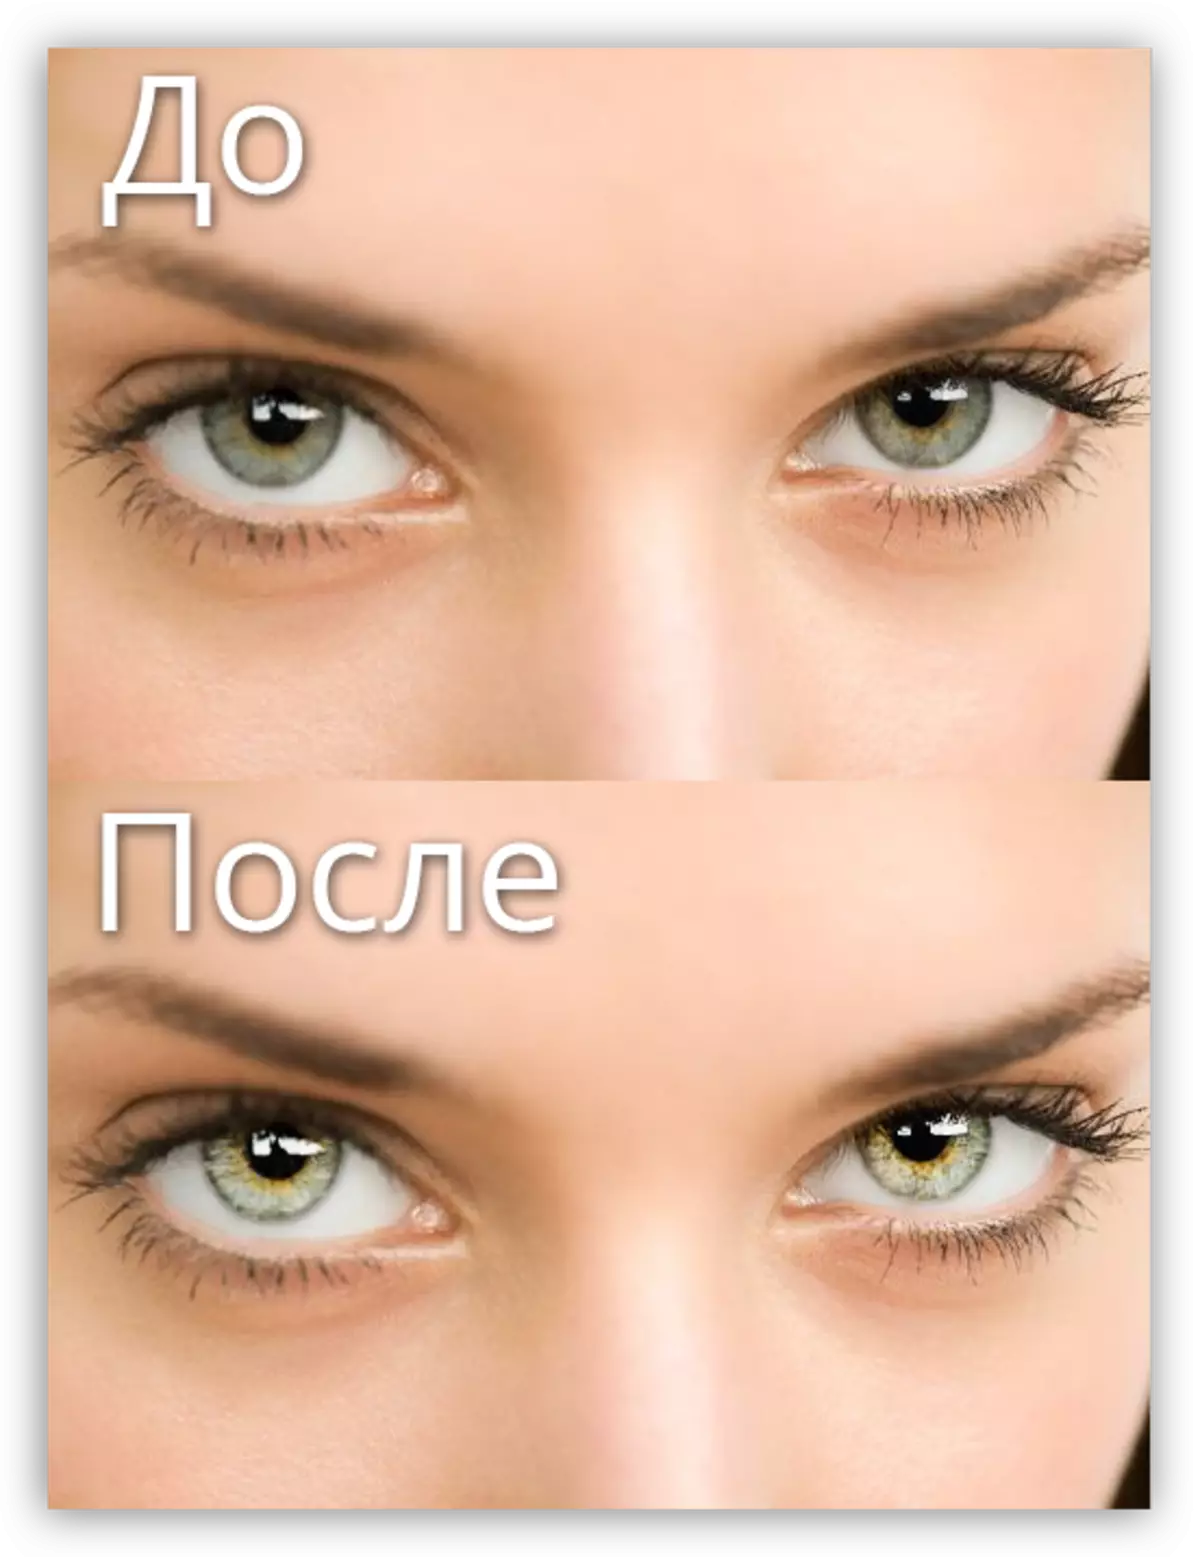 The result of the selection of the eyes in Photoshop